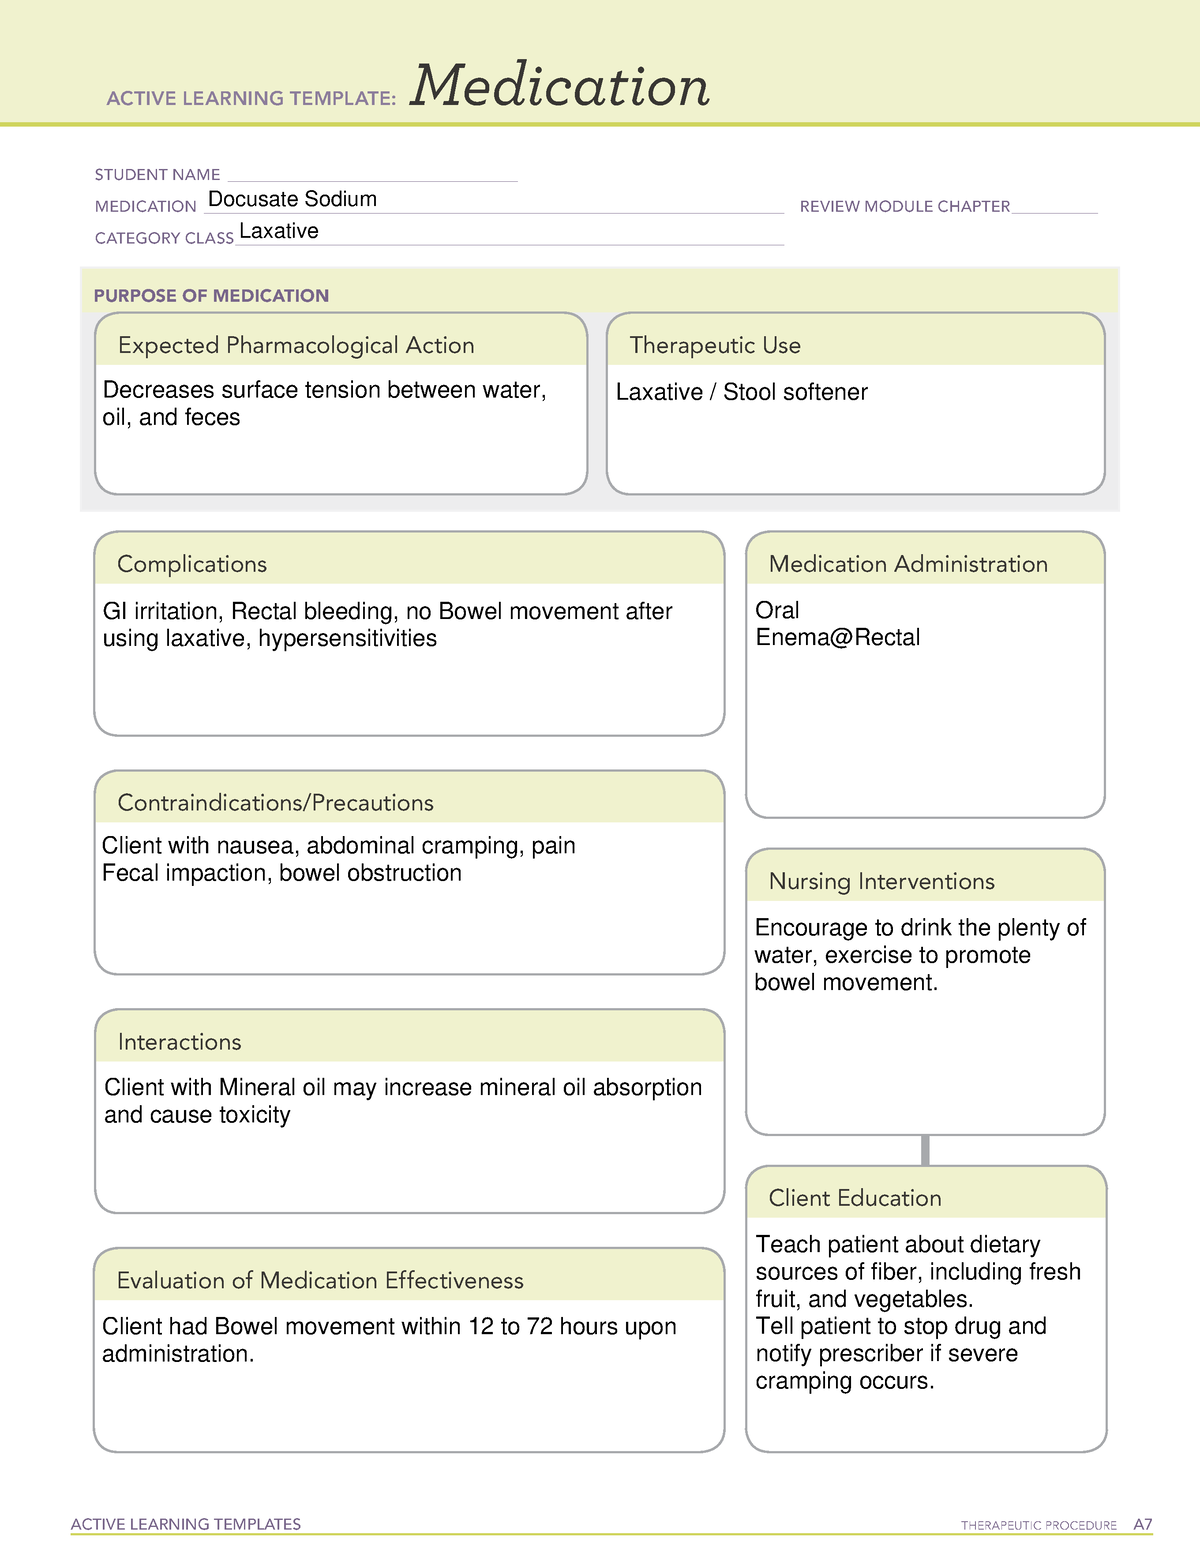 docusate-sodium-active-learning-templates-therapeutic-procedure-a-medication-student-name